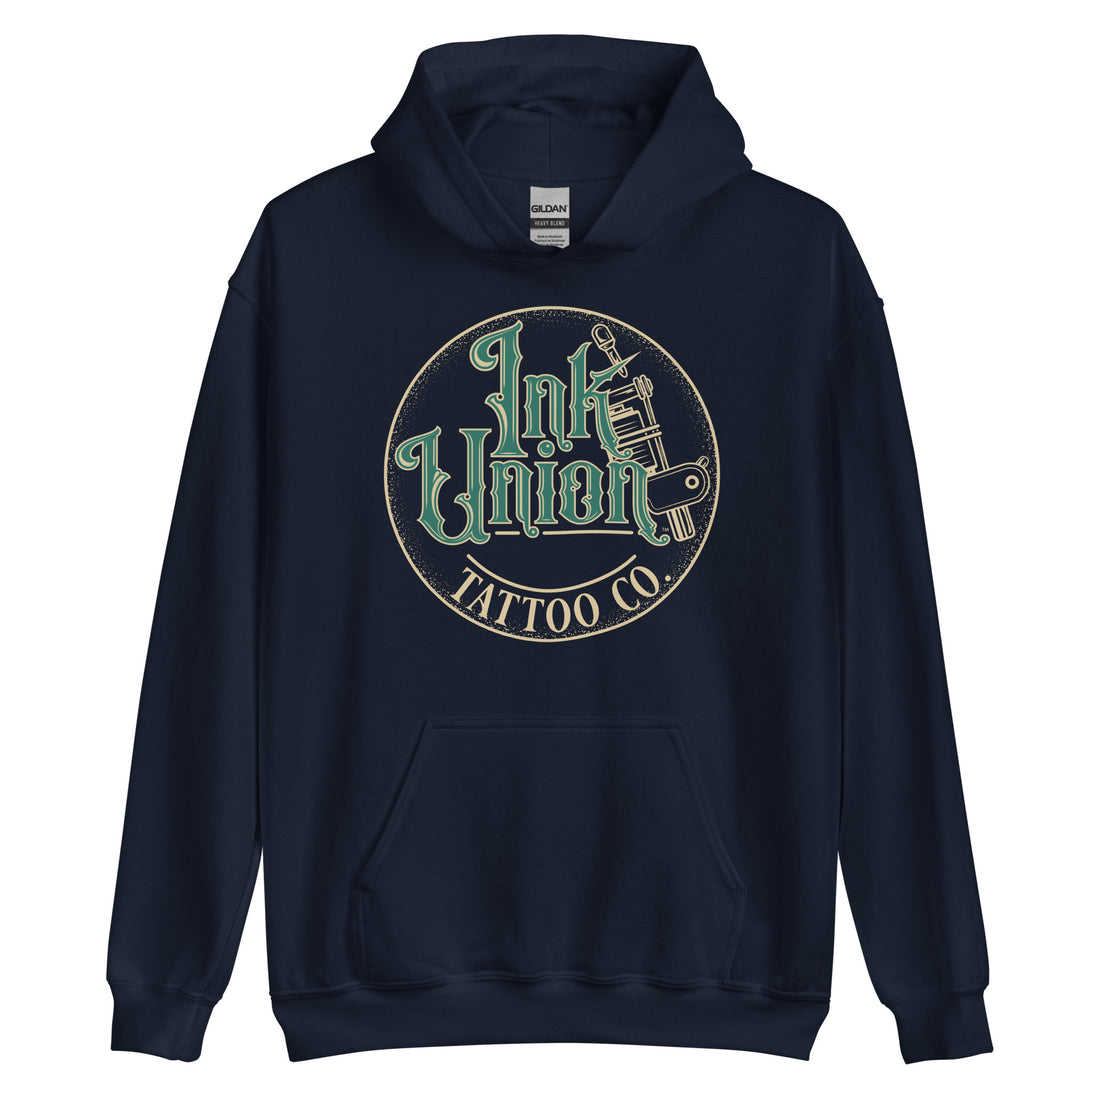 A navy blue hoodie with a gold circle containing fancy lettering in green and gold that says Ink Union and a gold tattoo machine peeking out from behind on the right side.  There is a dot work gradient inside the circle, and the words Tattoo Co. in gold are at the bottom of the design.